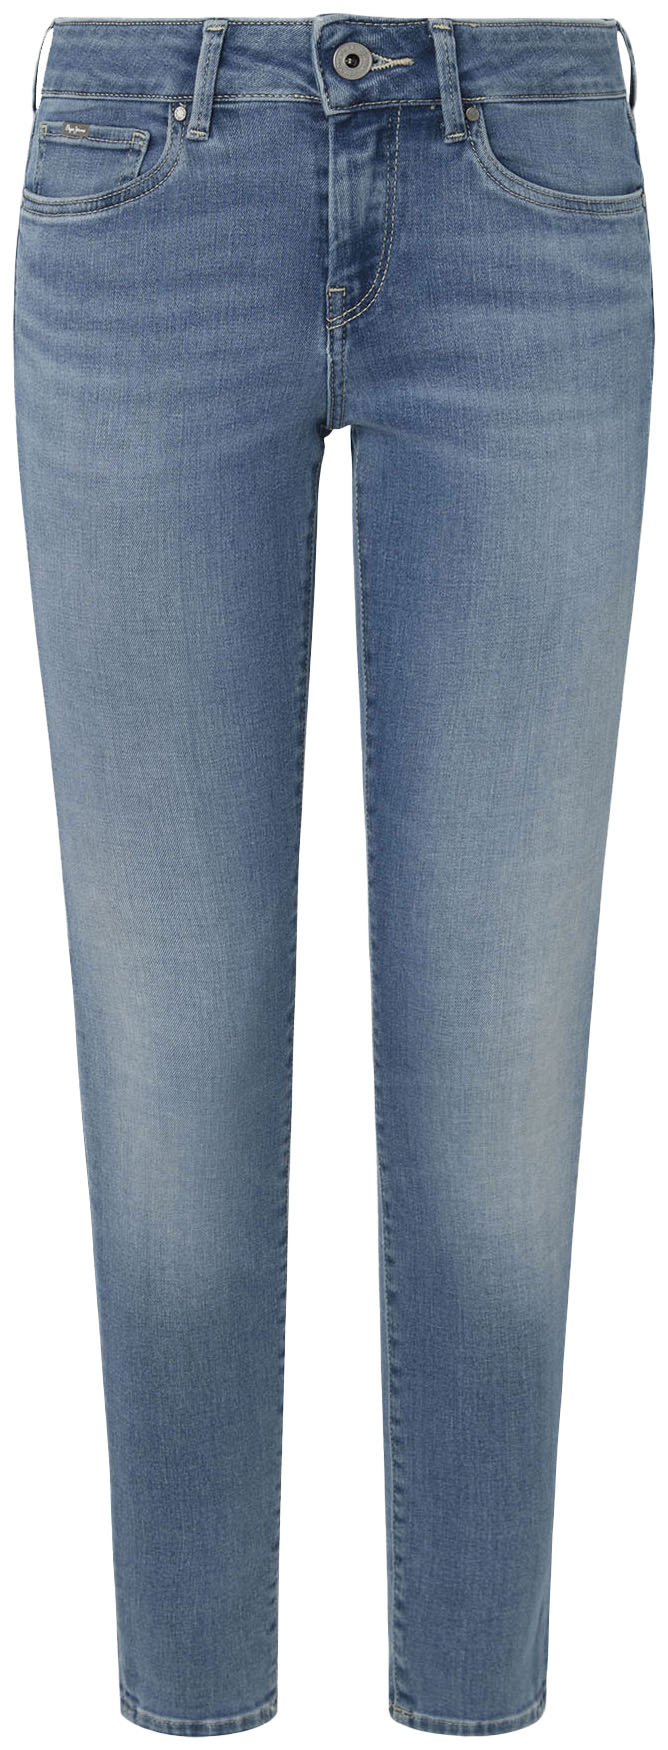 Pepe Jeans Skinny-fit-Jeans »SKINNY JEANS LW« von Pepe Jeans